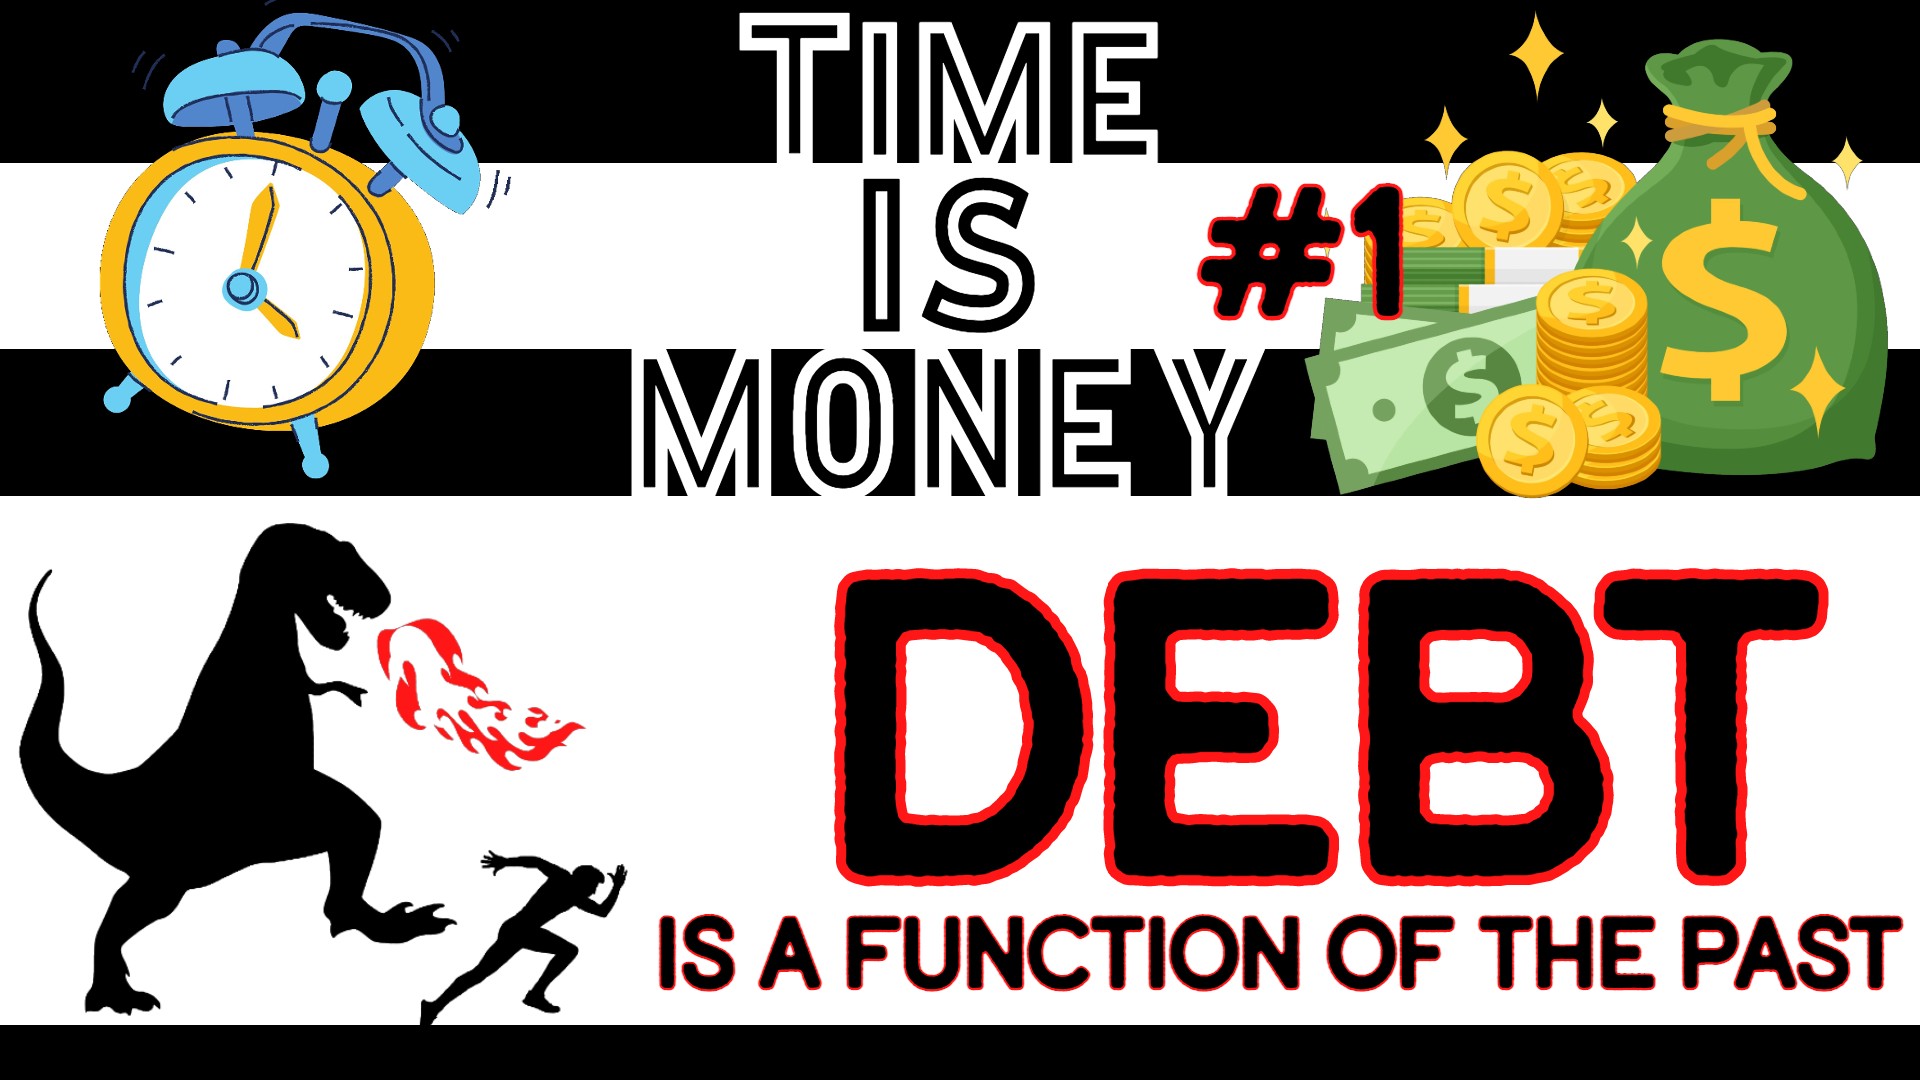 Time is Money #1: Debt is a Function of the Past